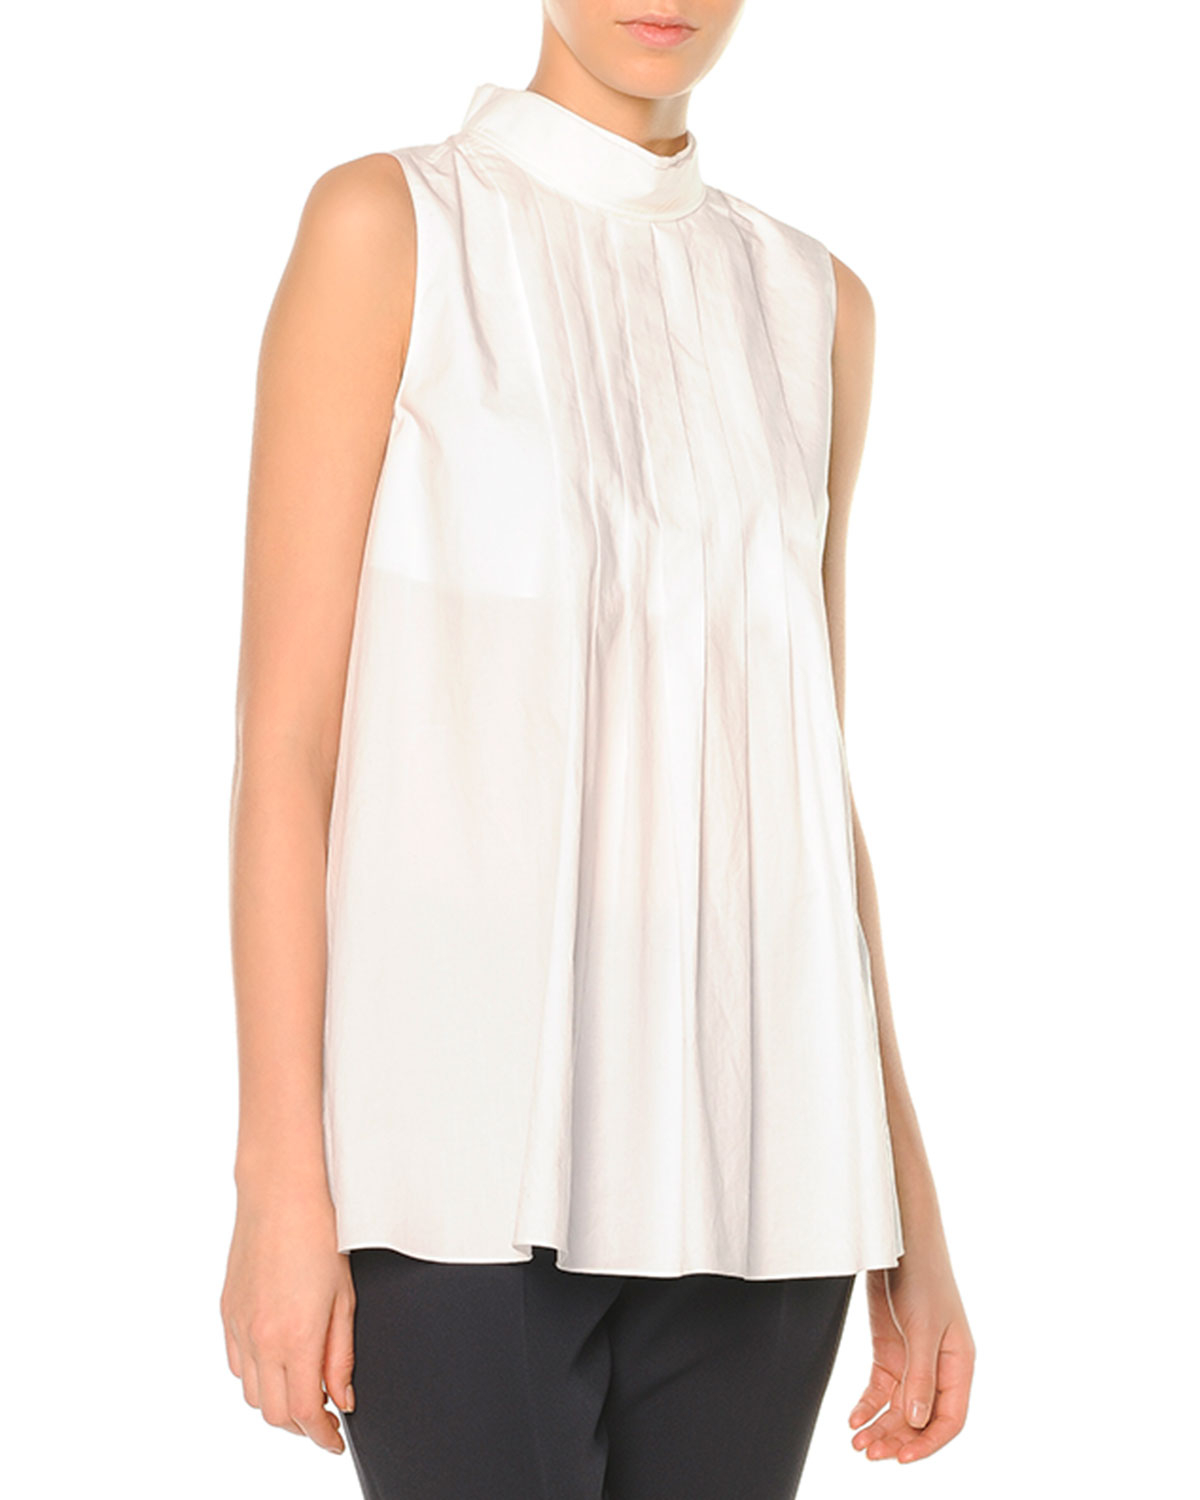 Marni Knife-pleated Button-back Blouse in White | Lyst